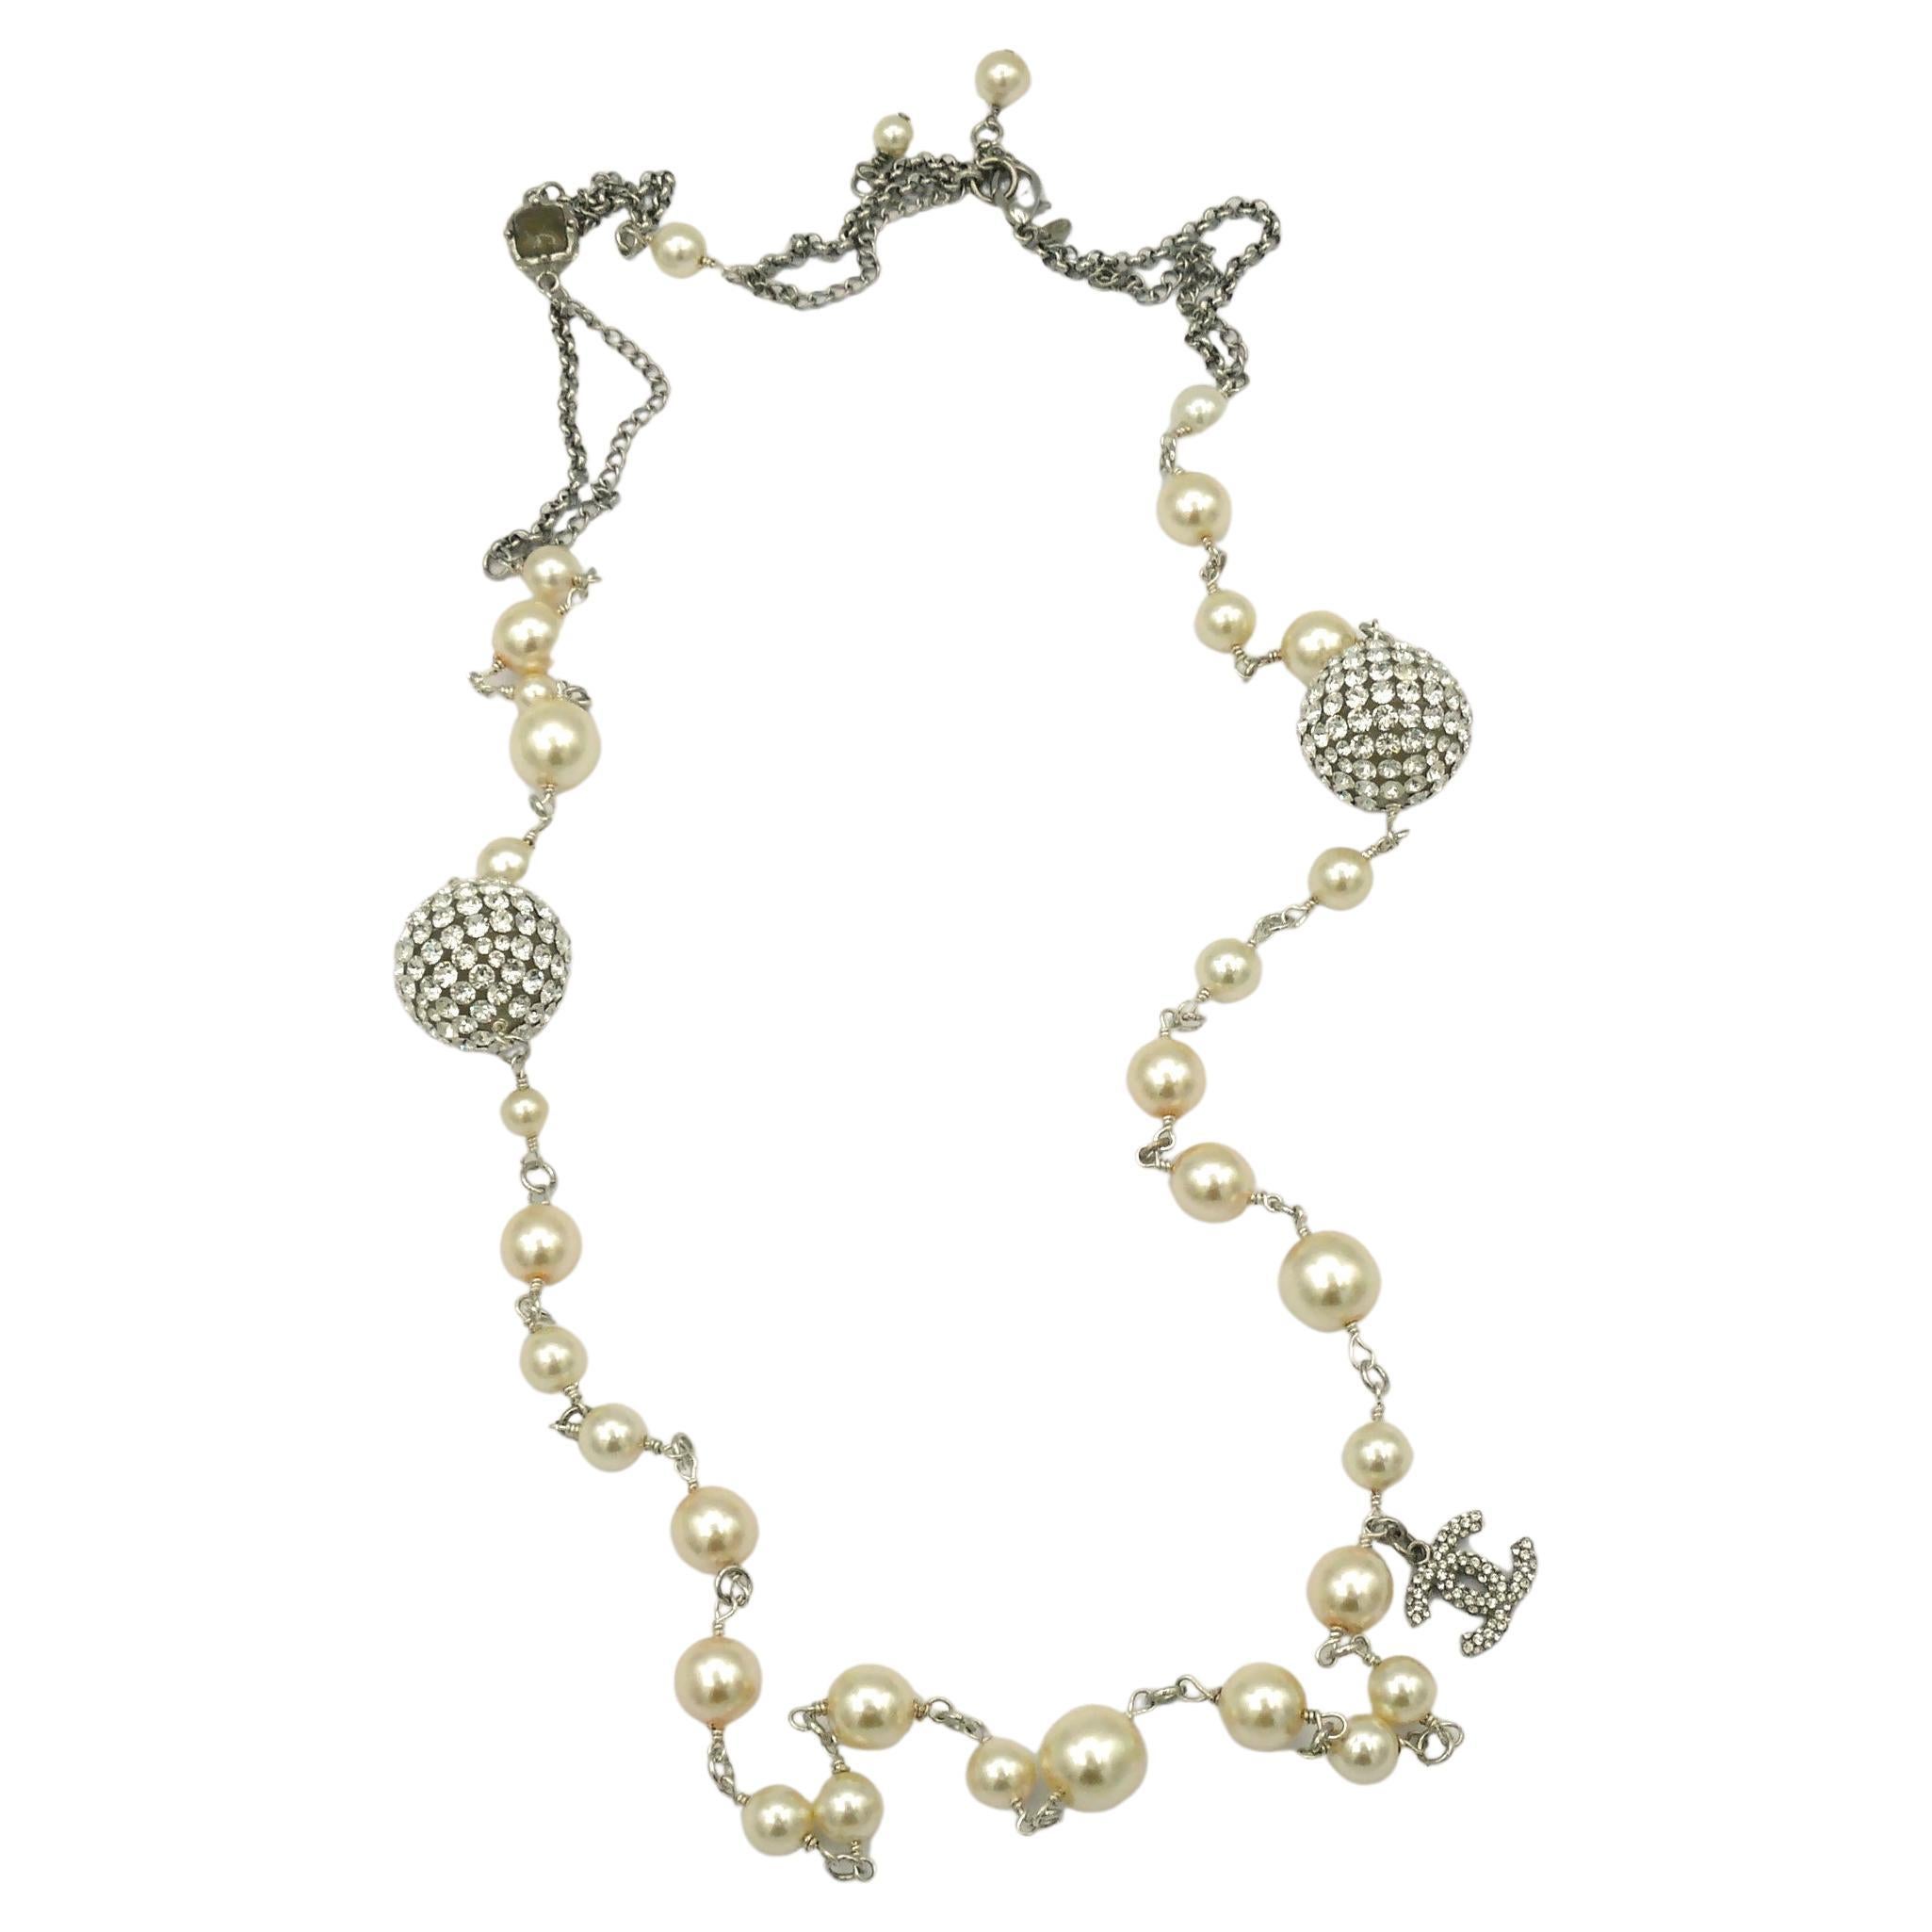 Chanel 5 Silver CC Crystal Faux Pearl Long Necklace at 1stDibs  chanel  glass pearls cc necklace, chanel necklace pearls, faux chanel cc necklace